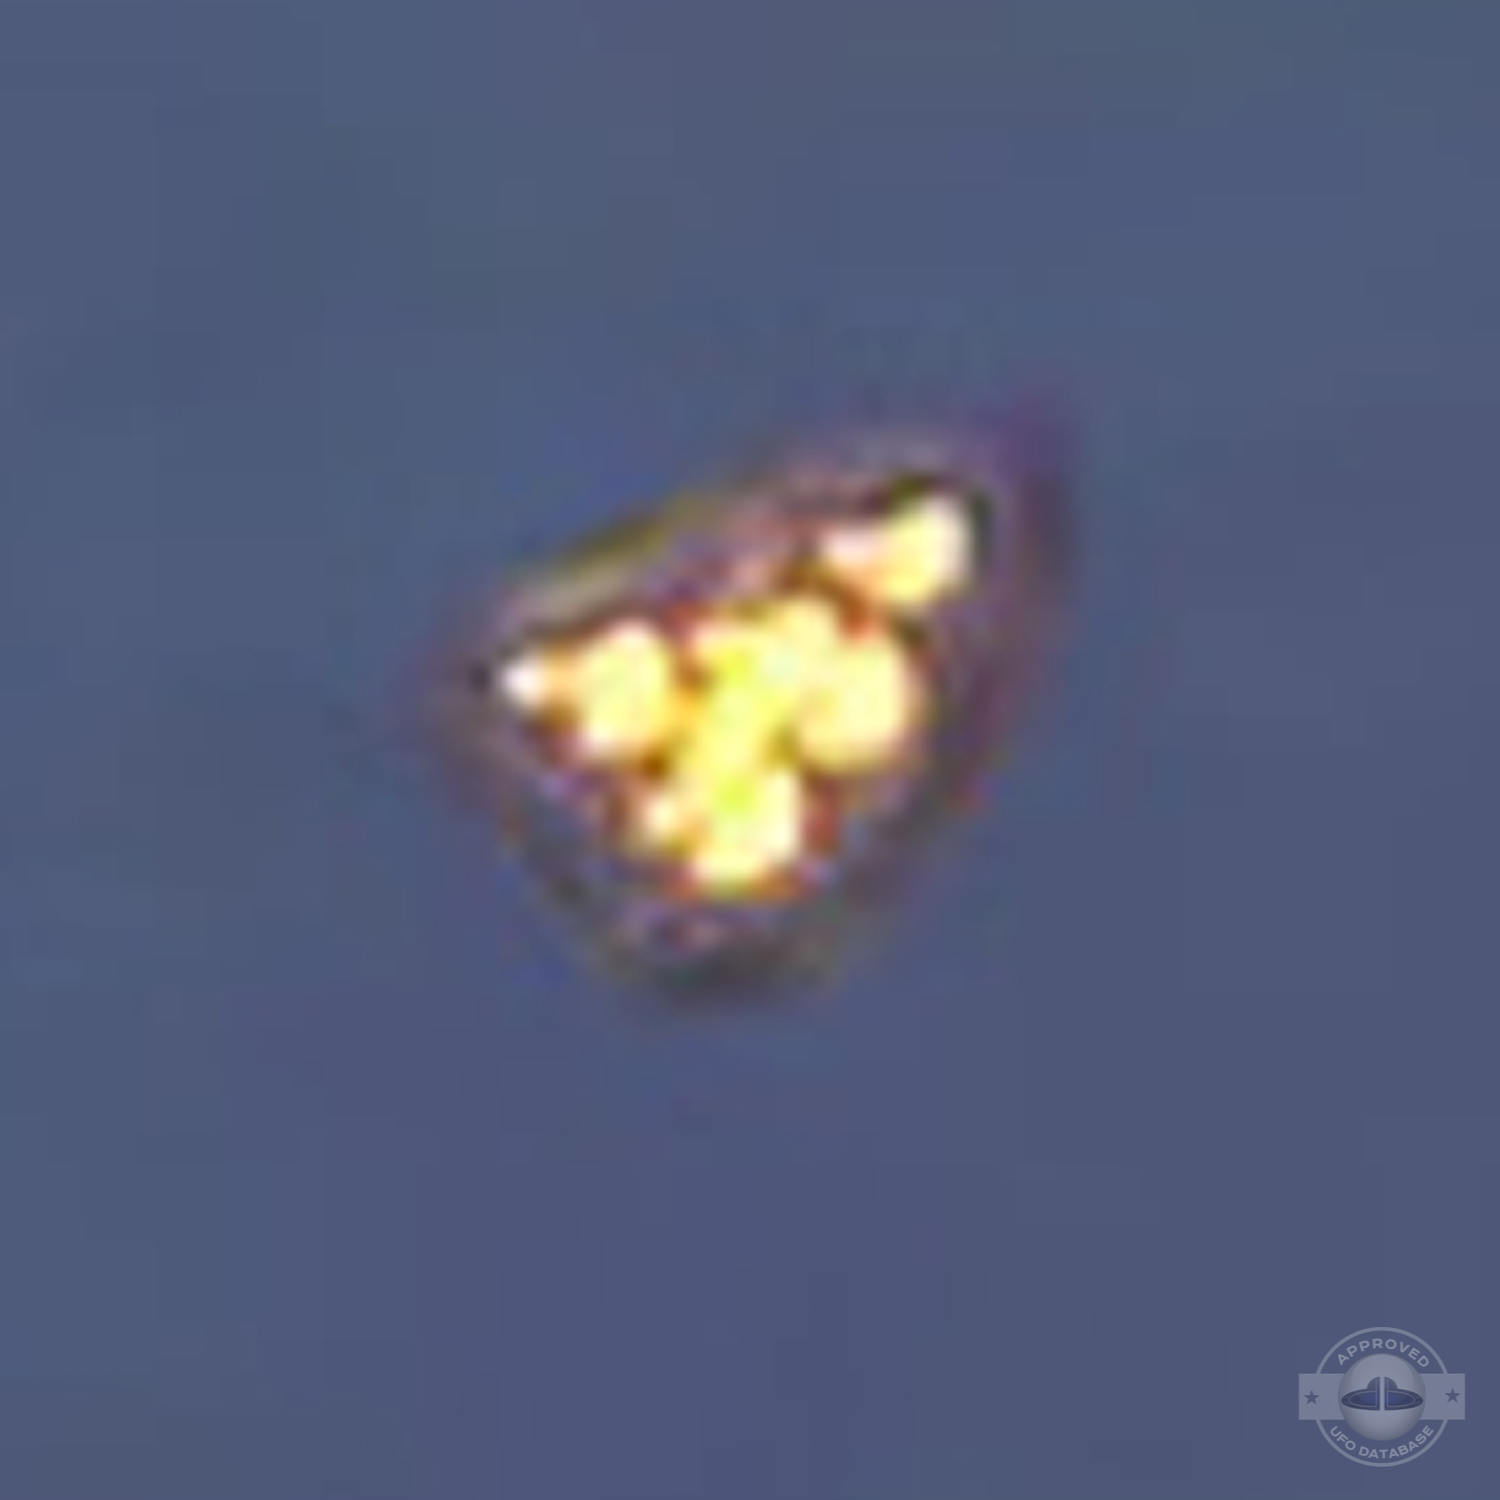 UFO seen by hundreds in Vladivostok | Russia UFO picture | 2010 UFO Picture #167-7